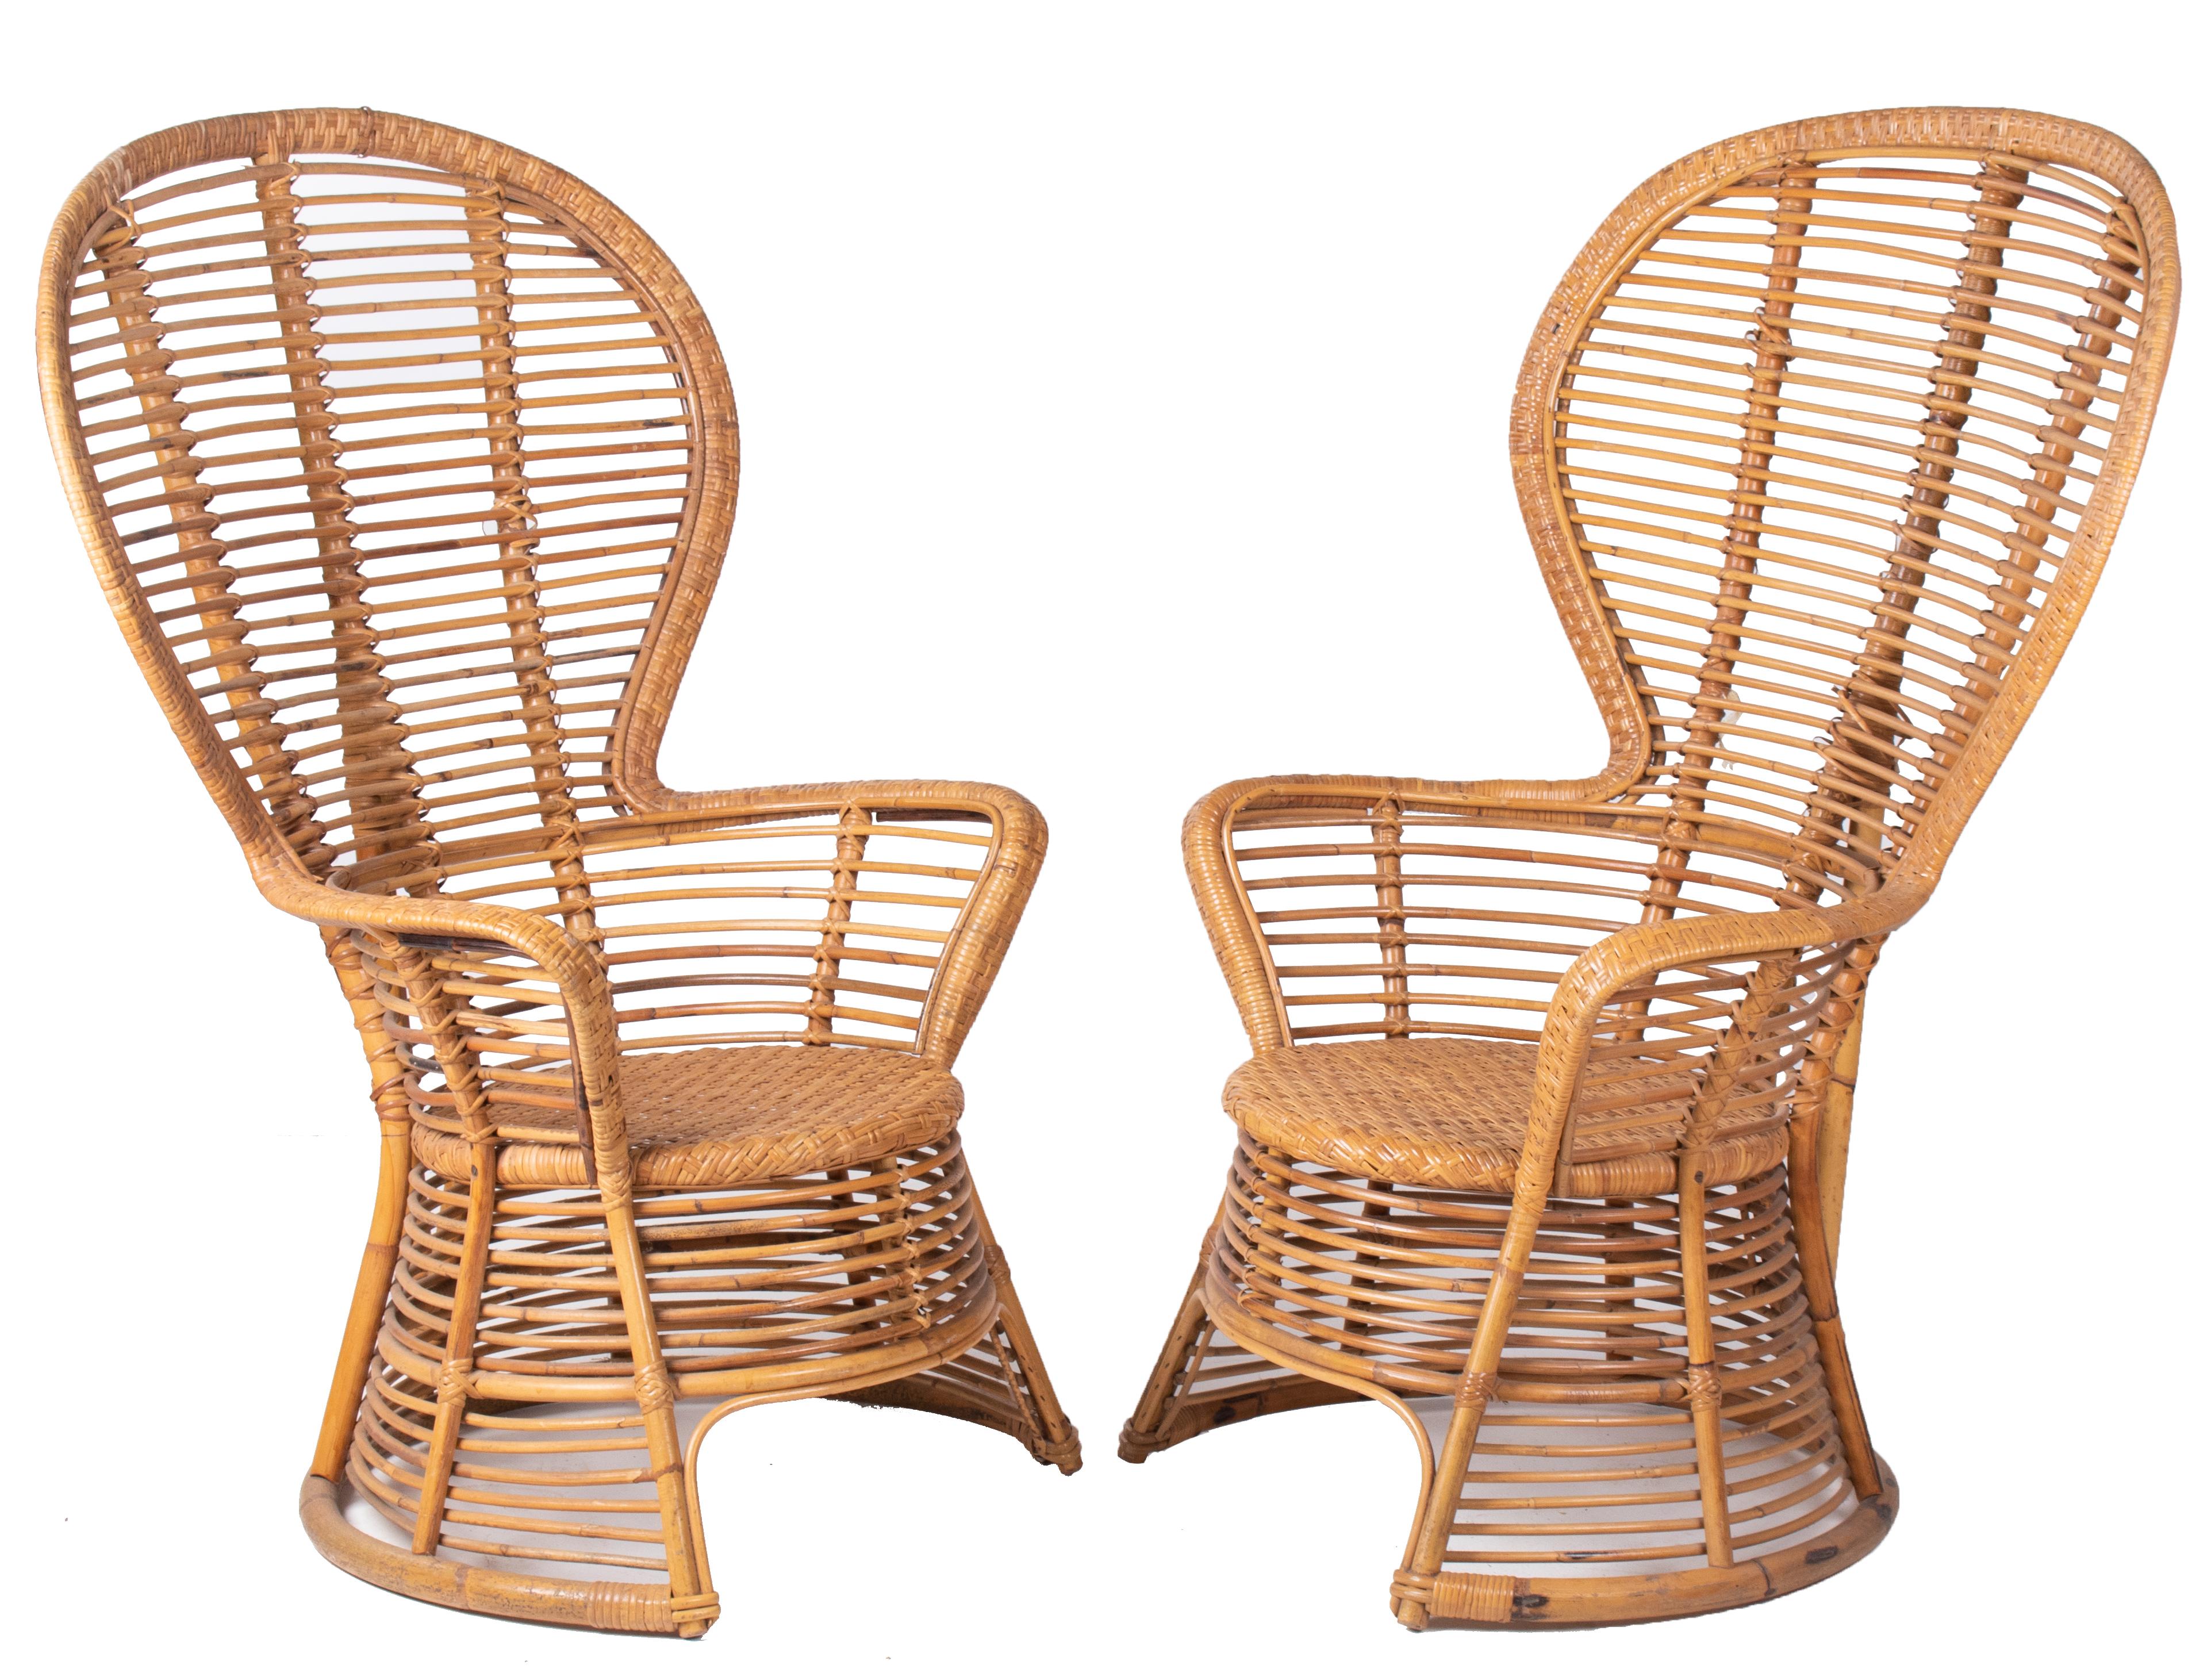 1970s Spanish pair of bamboo tall backrest armchairs in the style of Emmanuelle Peacock chairs.